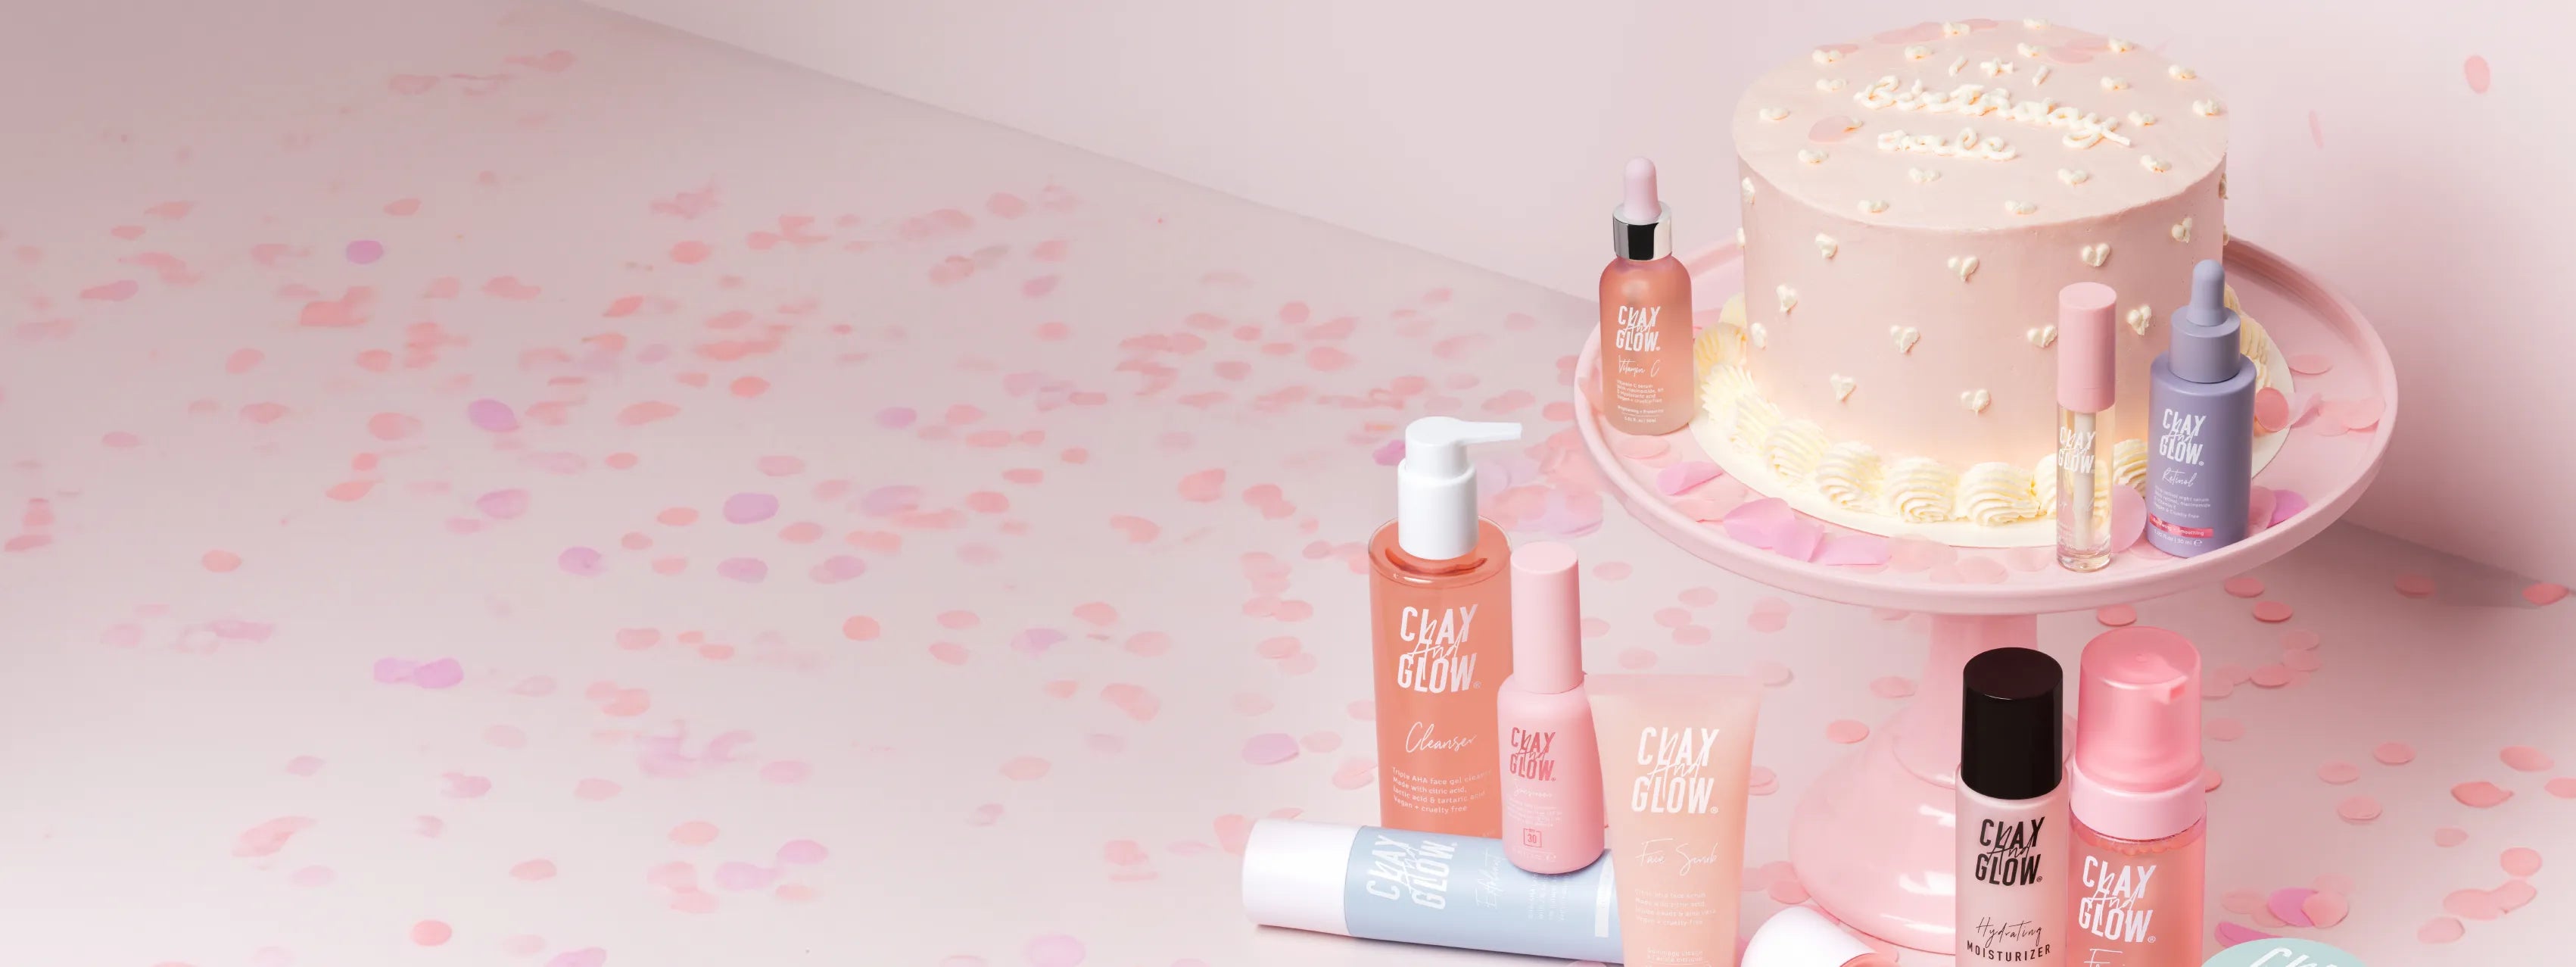 Celebrating 5 Glowing Years: Clay And Glow's Anniversary